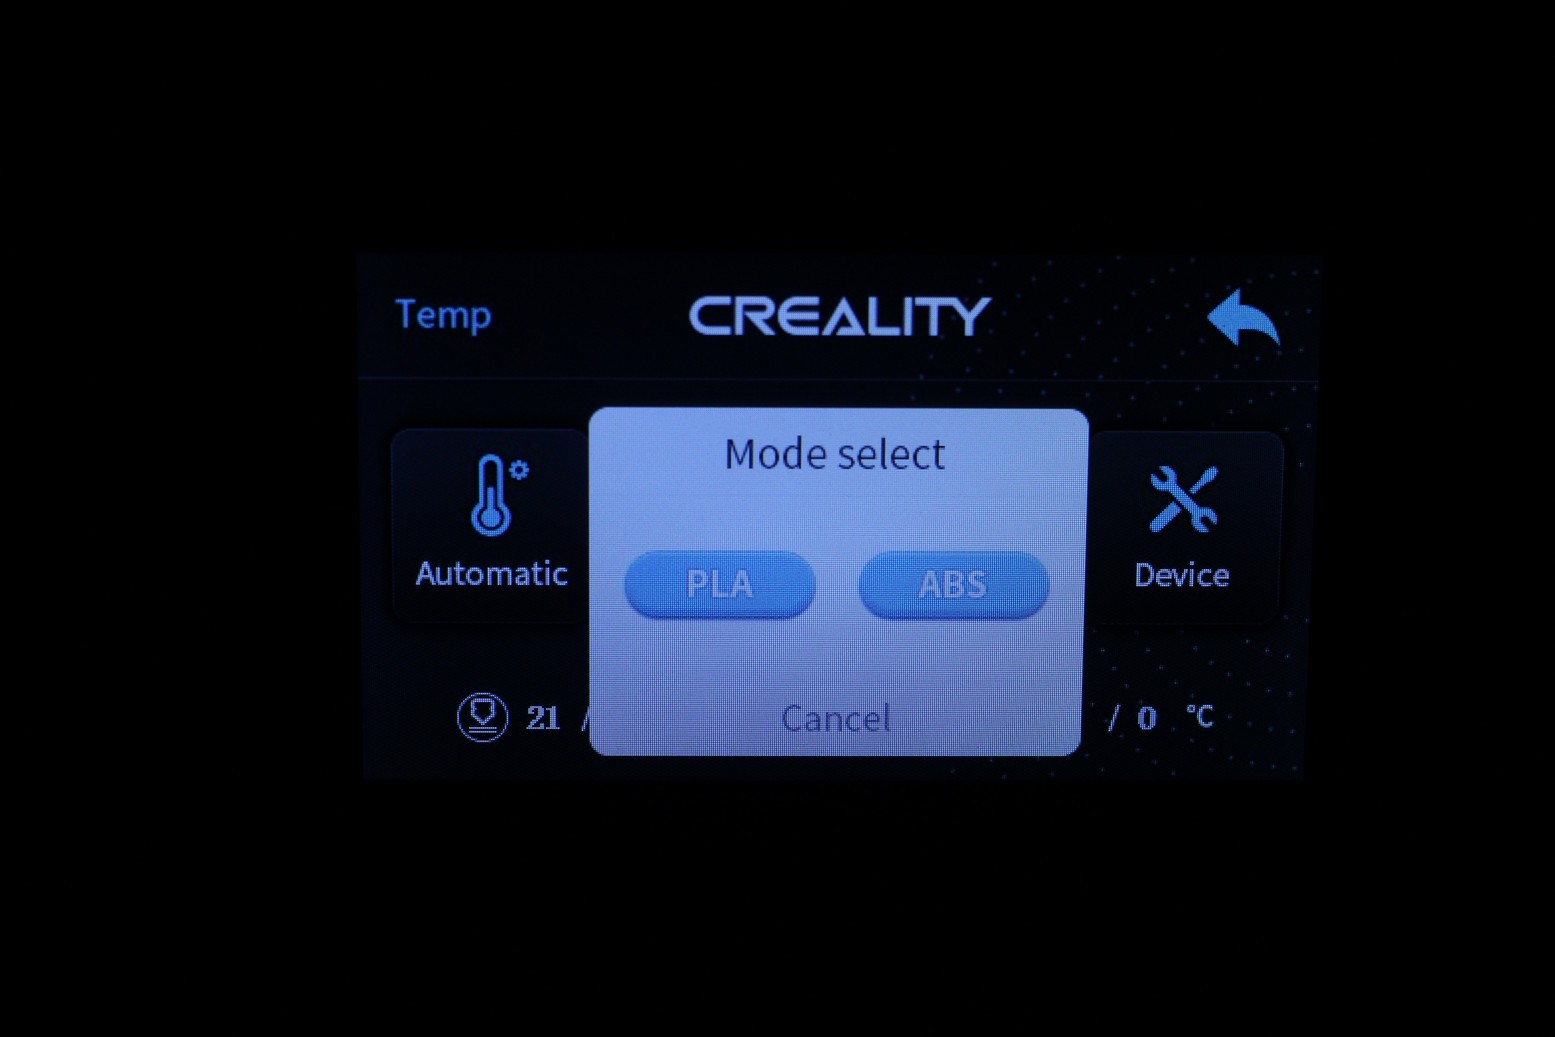 CR 200B Review Touchscreen Interface 6 | Creality CR-200B Review: Budget Enclosed 3D Printer